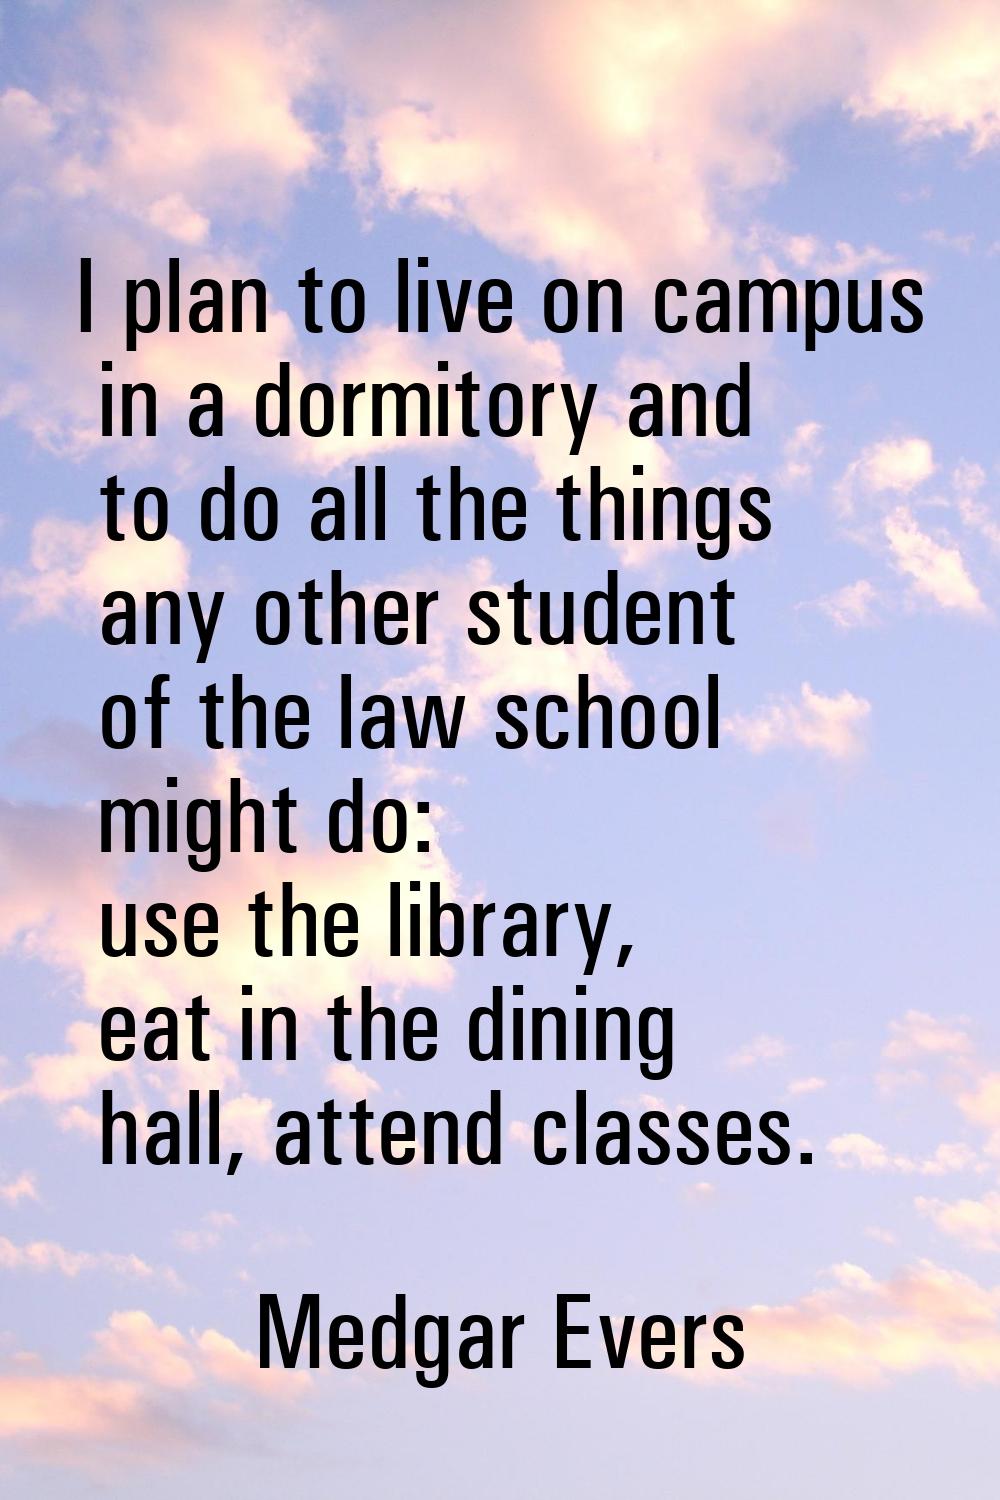 I plan to live on campus in a dormitory and to do all the things any other student of the law schoo